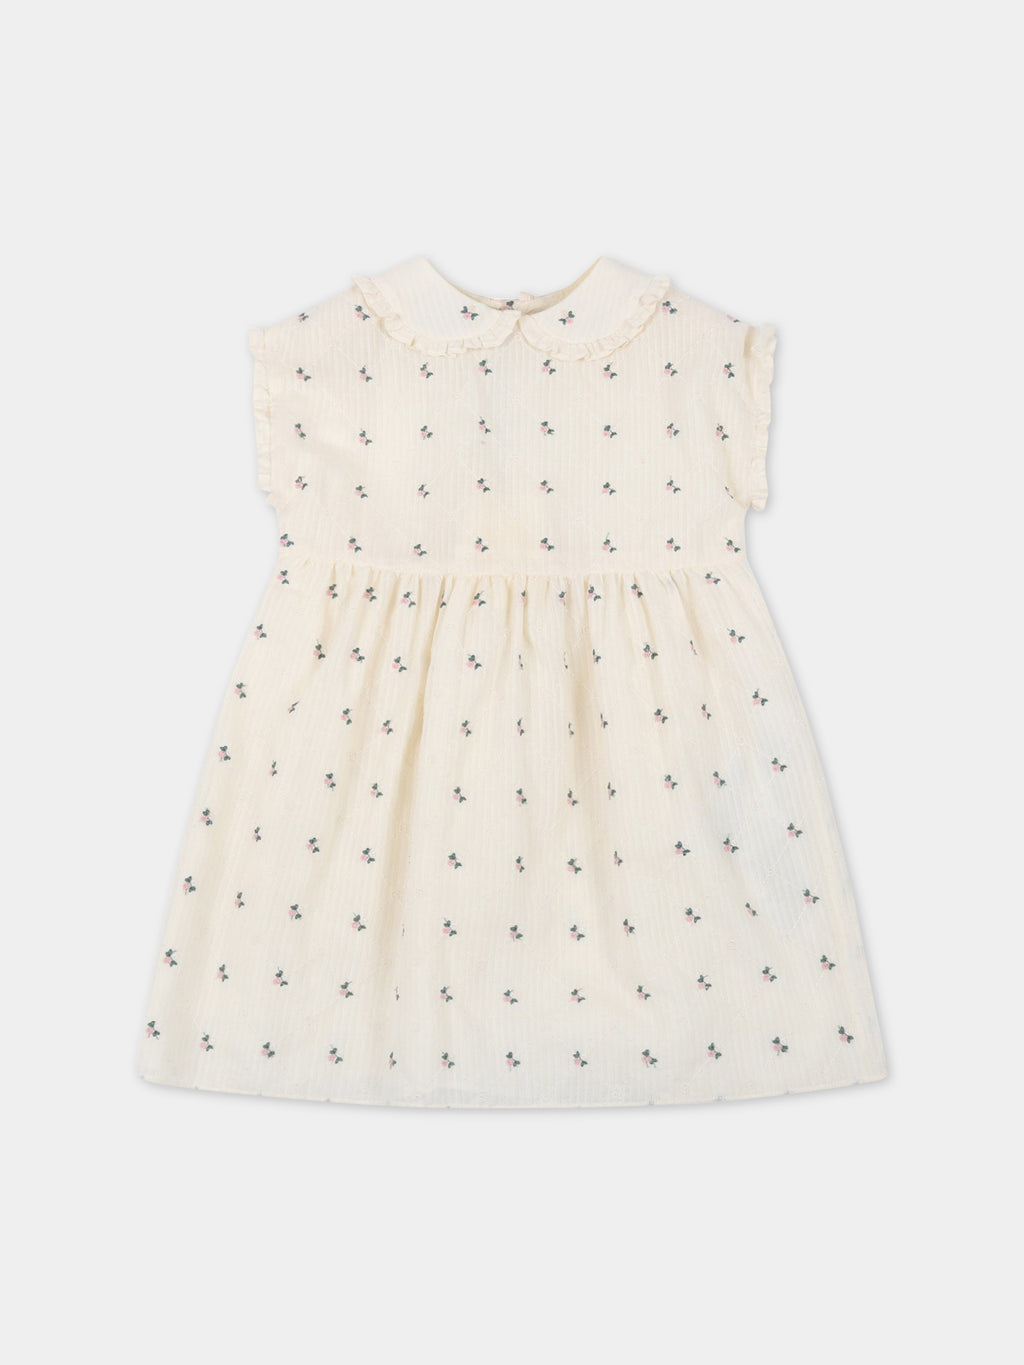 Ivory dress for baby girl with flowers